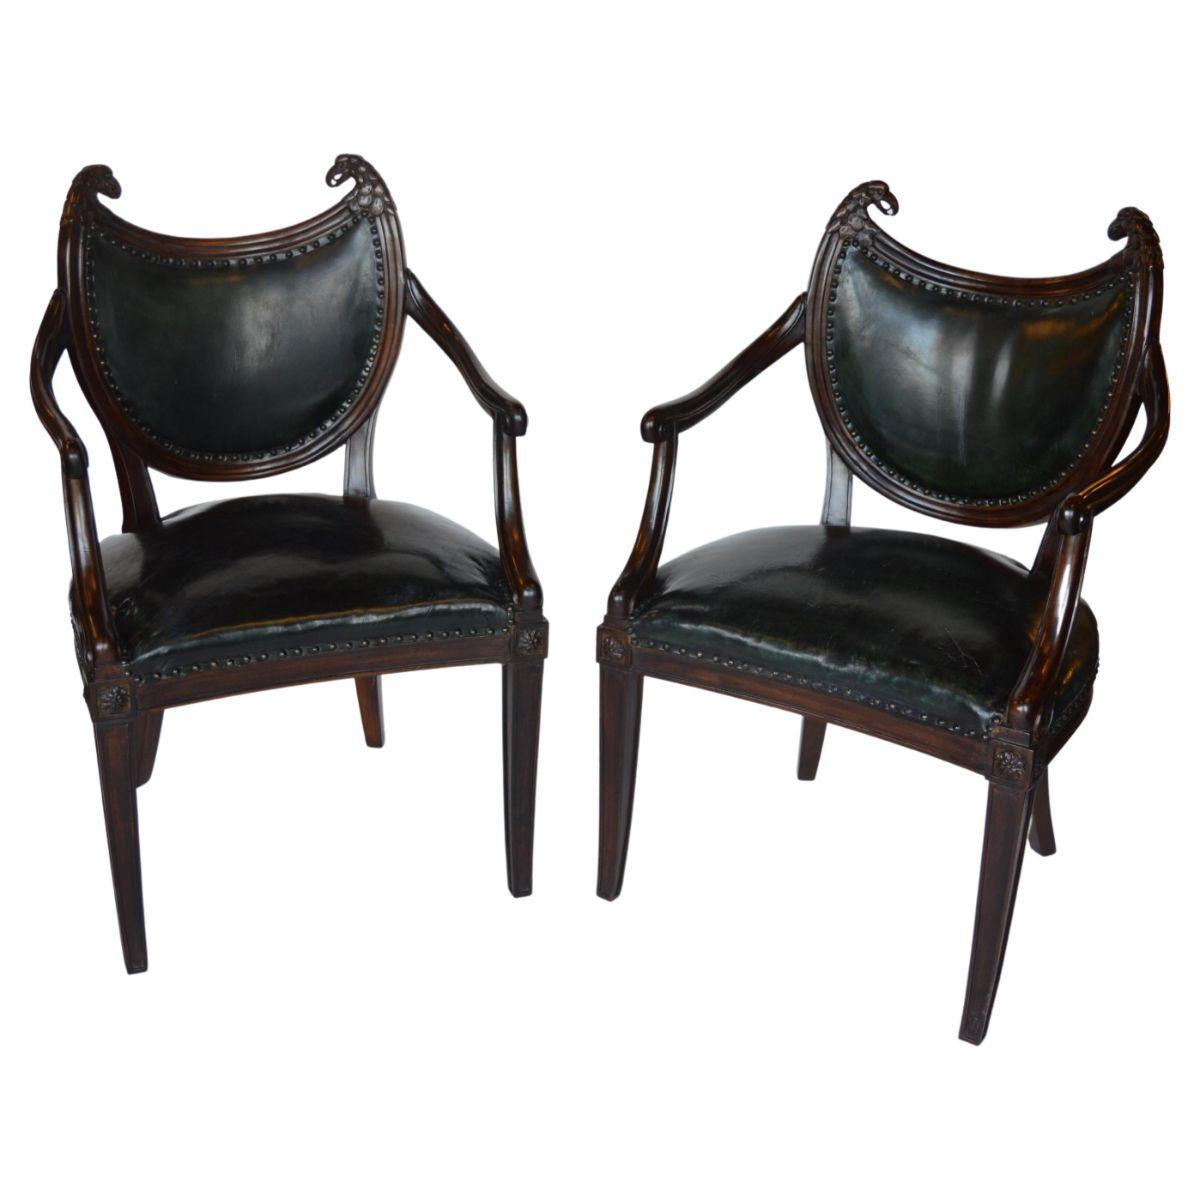 French Bistro arm chair set with green leather upholstery. Beautifully carved mahogany wood with eagle finials and brass nail heads on the seat and back.